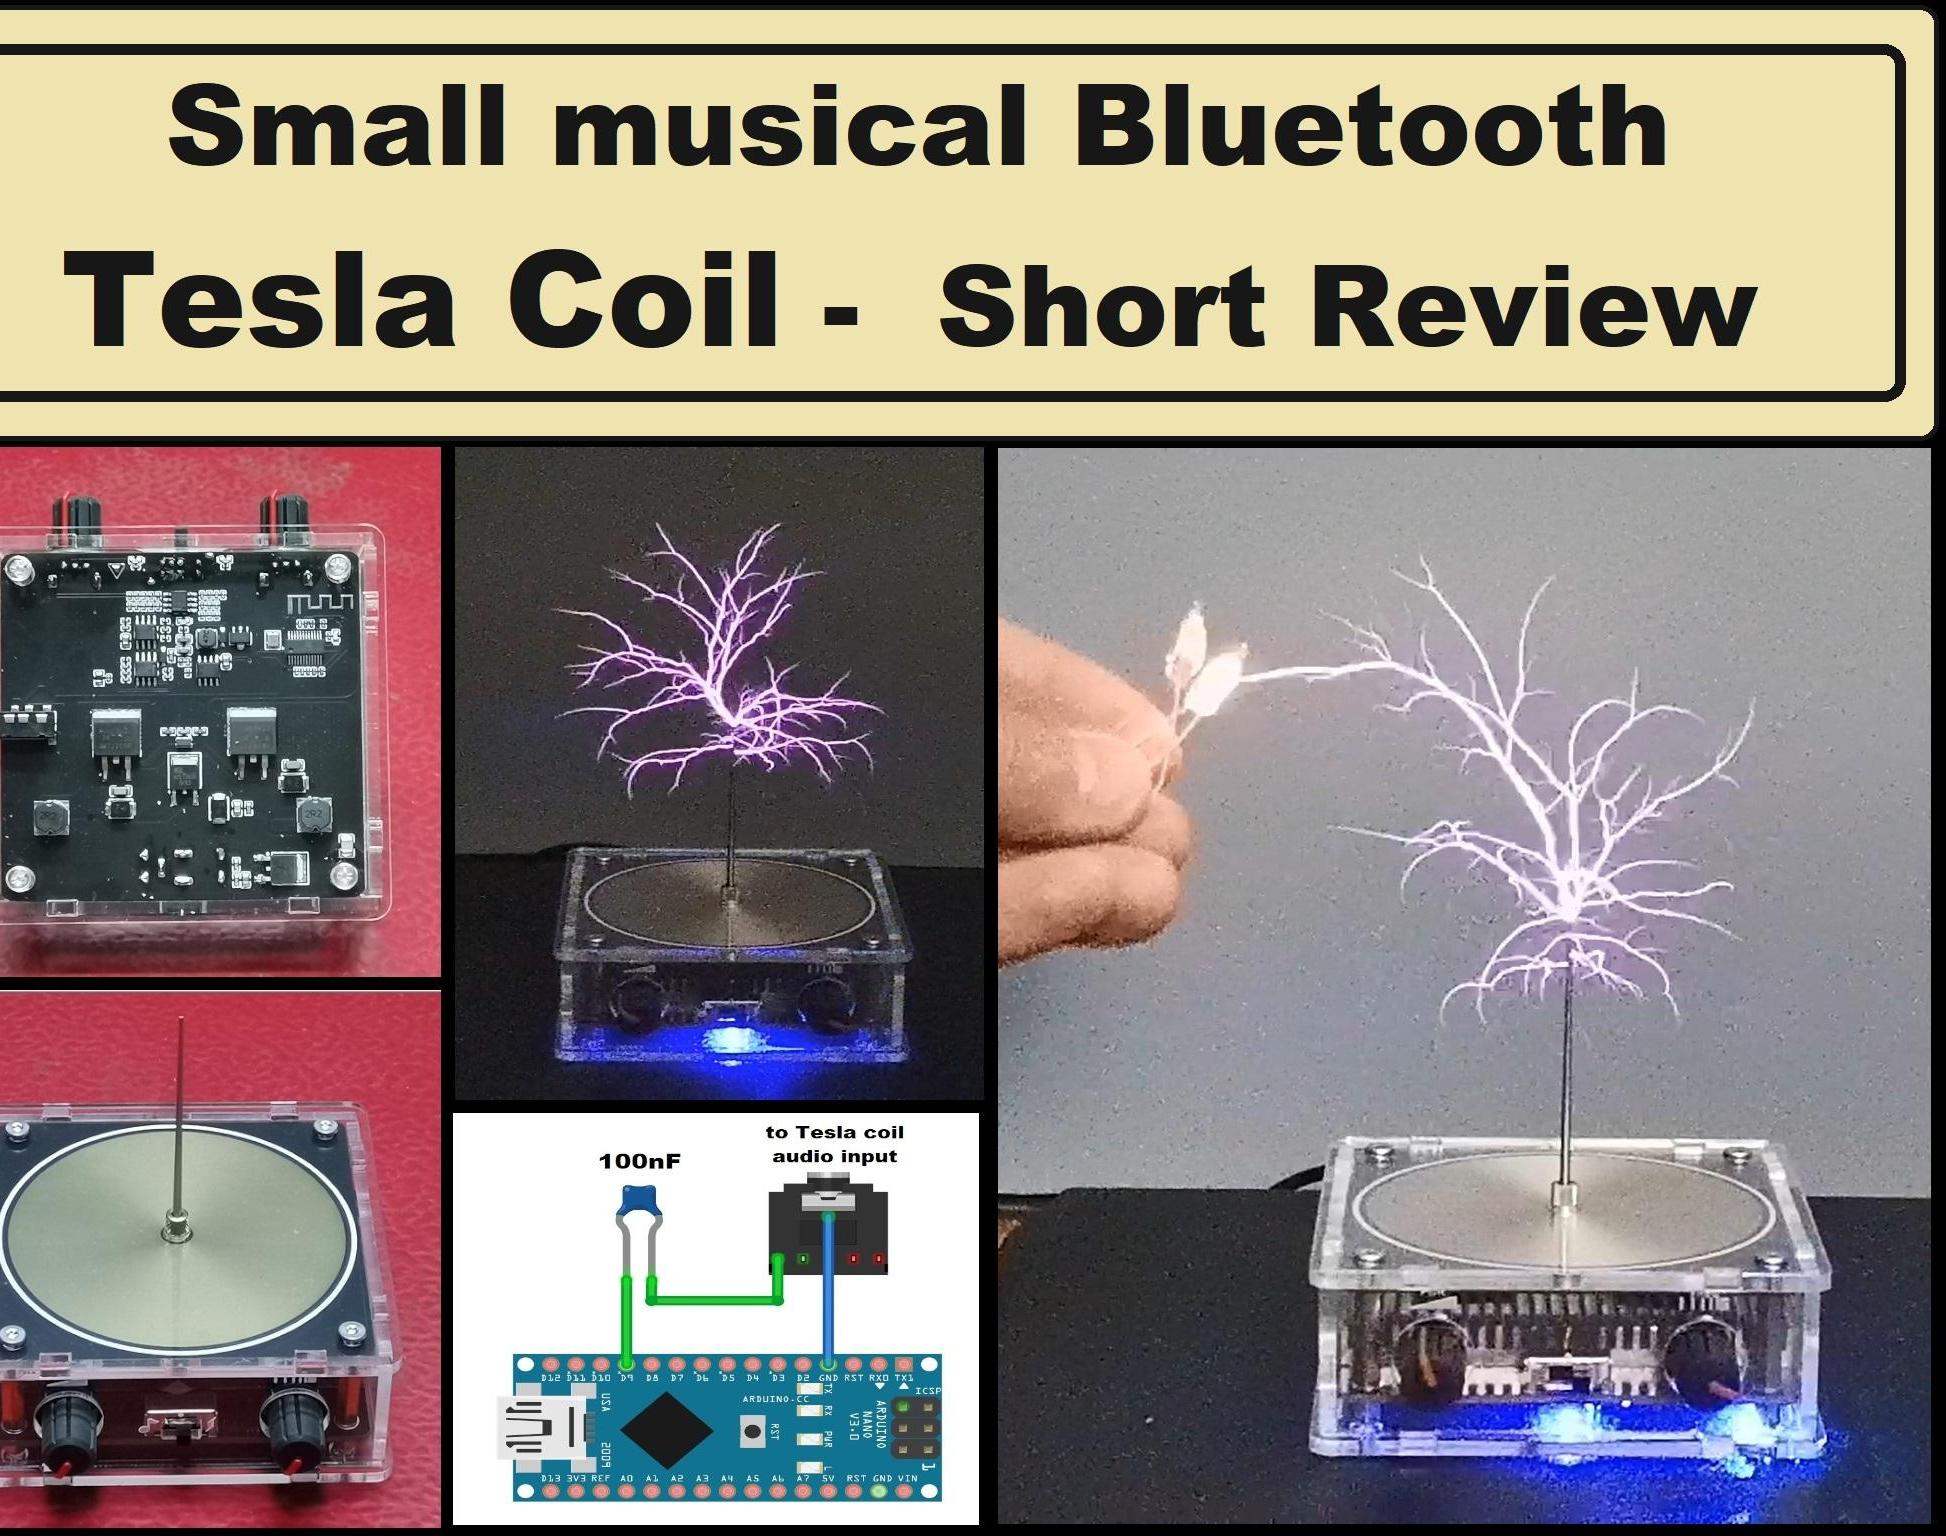 Short Review of Small Music Tesla Coil With Bluetooth